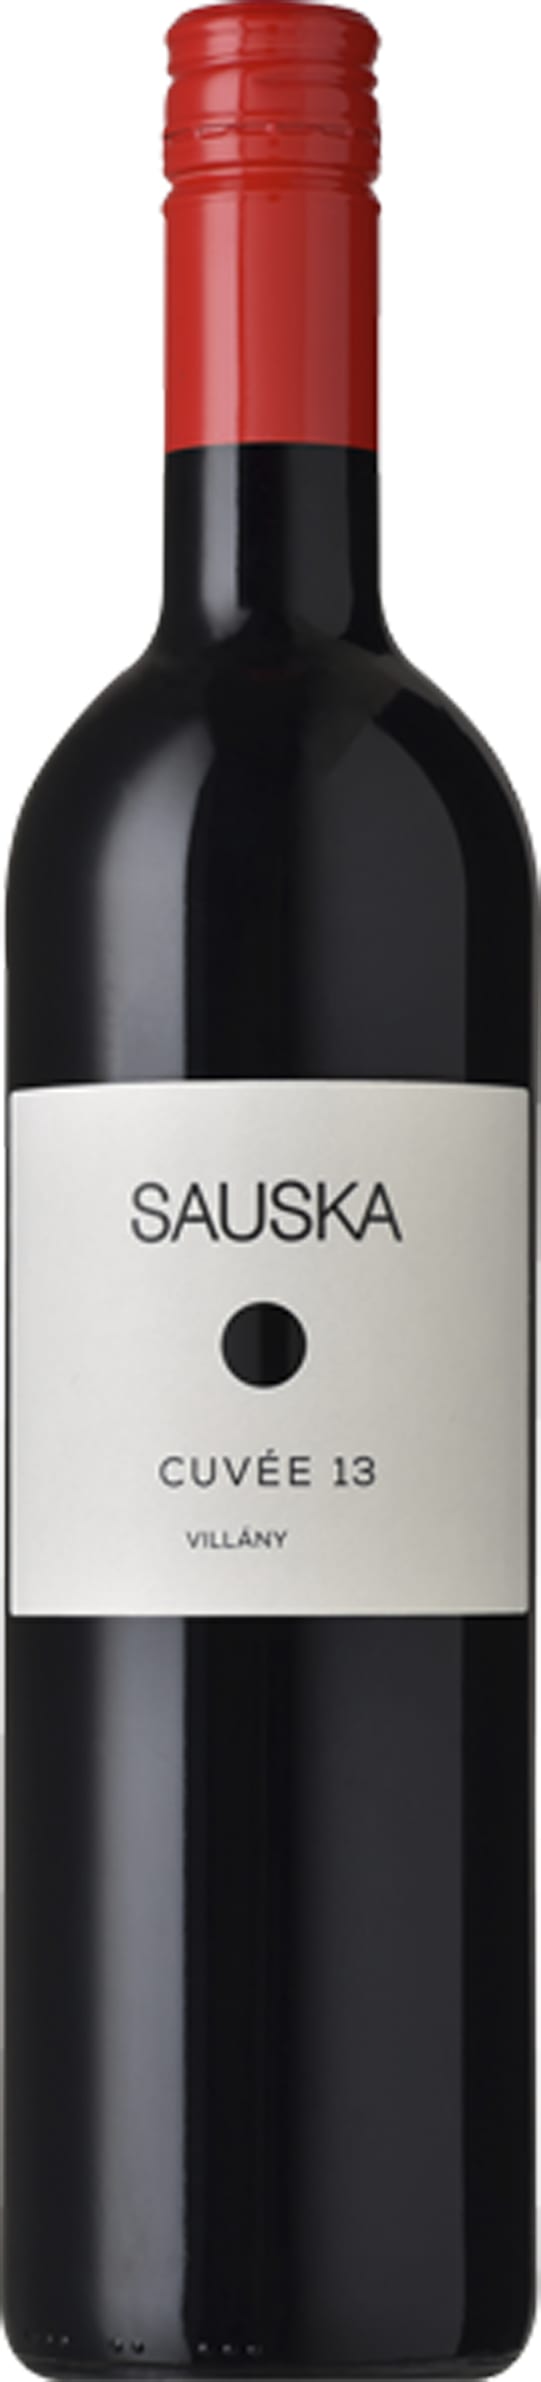 Sauska Cuvee 13 Red Blend 2020 75cl - Buy Sauska Wines from GREAT WINES DIRECT wine shop